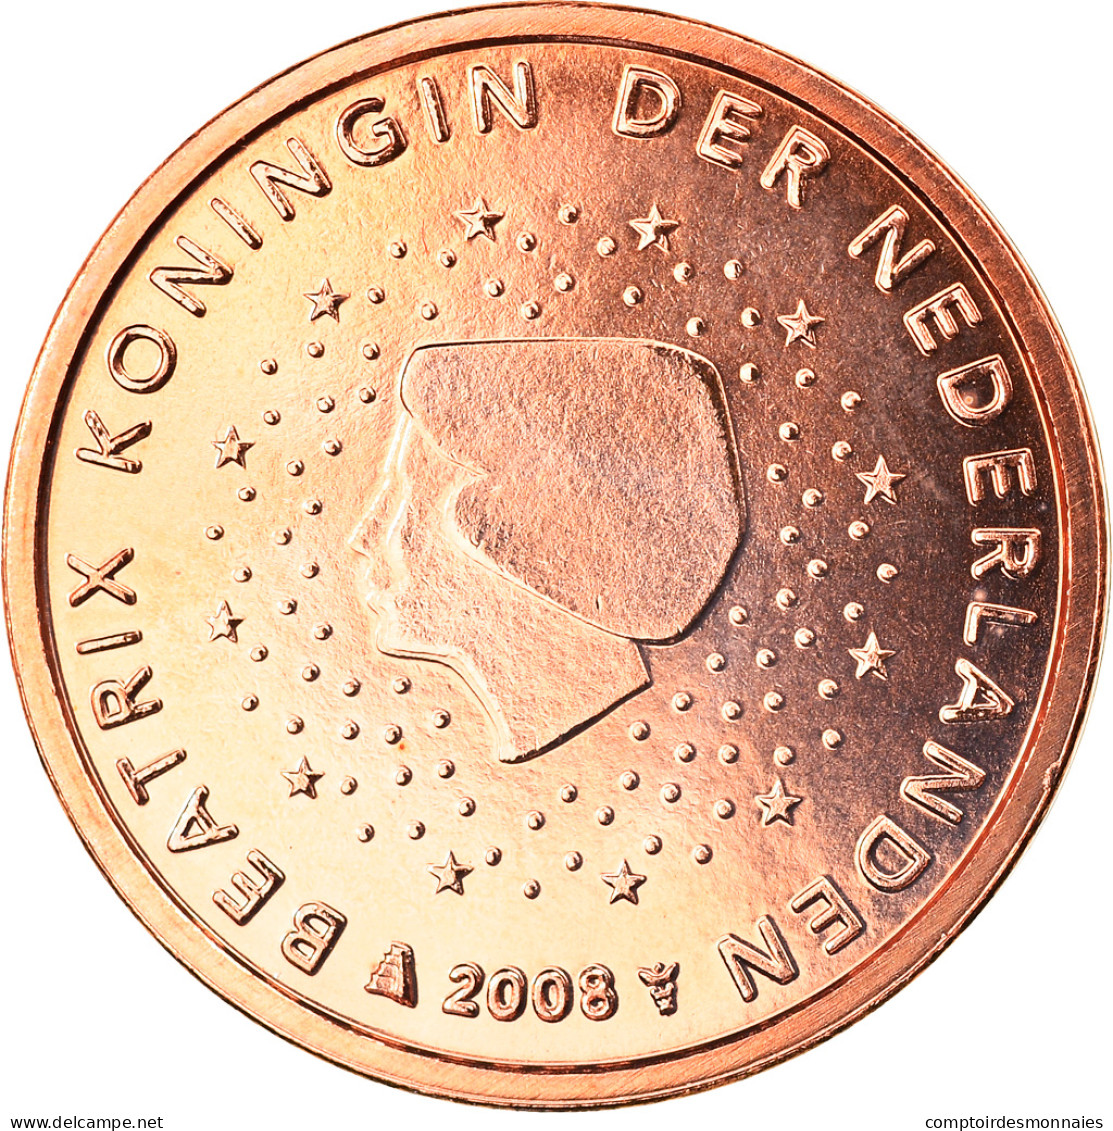 Pays-Bas, 2 Euro Cent, 2008, Utrecht, FDC, Copper Plated Steel, KM:235 - Paesi Bassi